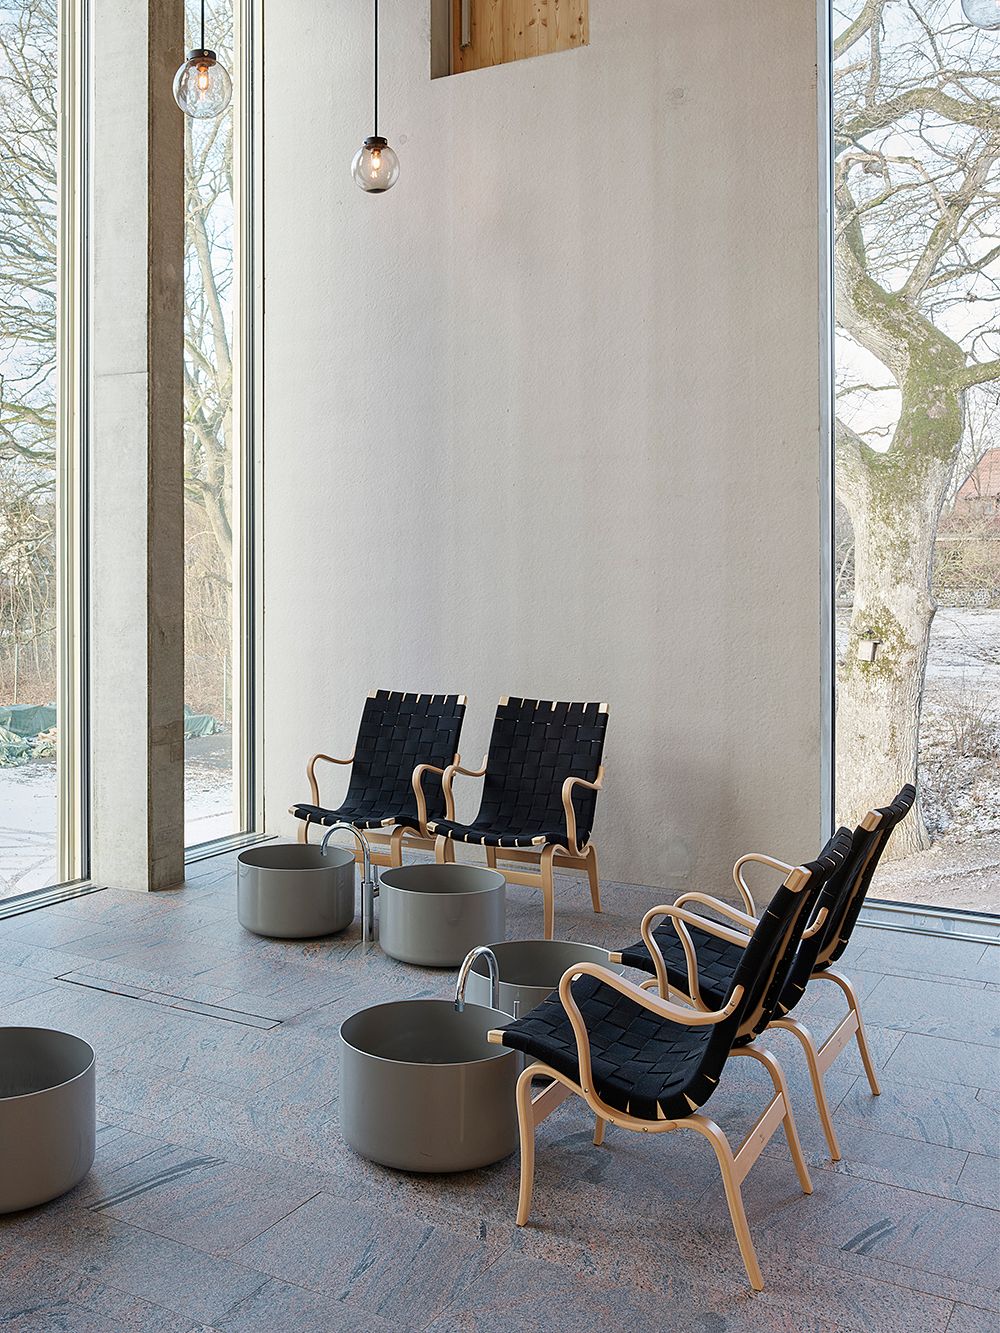 An image of Andrum spa's interior with Bruno Mathsson's Eva chairs as part of the interior.